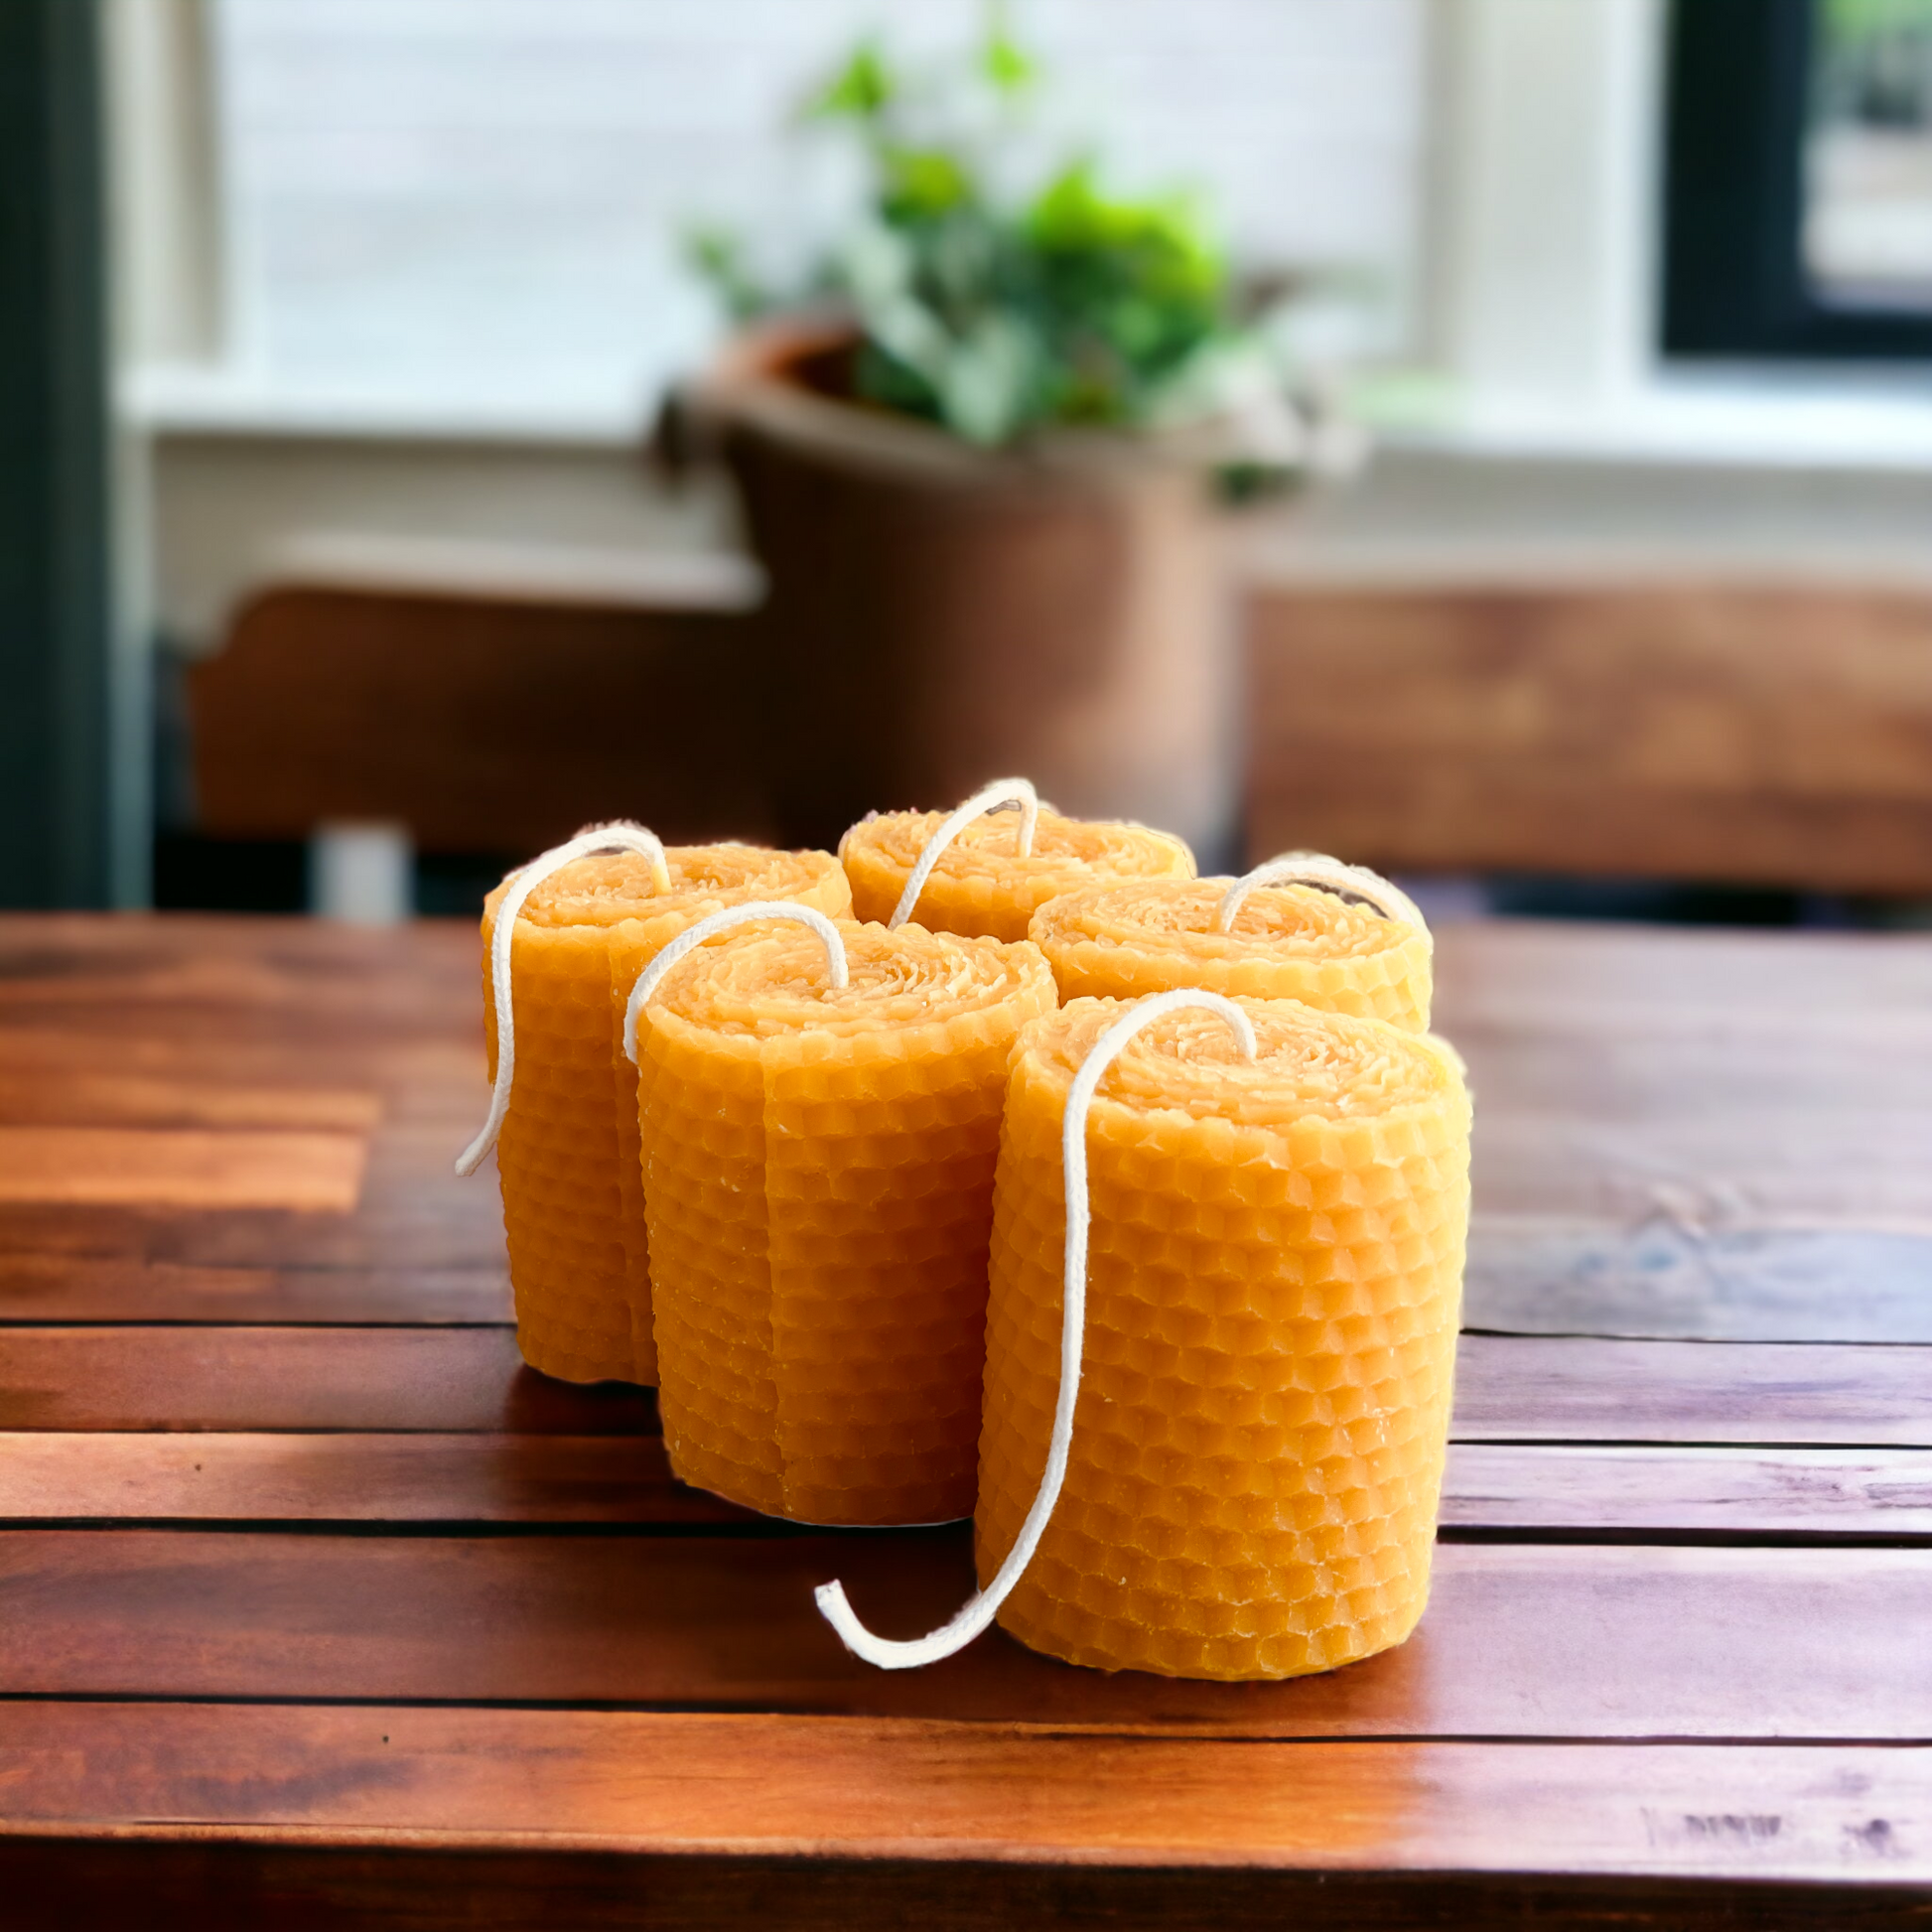 Honeycomb Rolled Design Pure Beeswax Mini Pillar- Votive Candle – Wild  Harvest Candle Company LLC